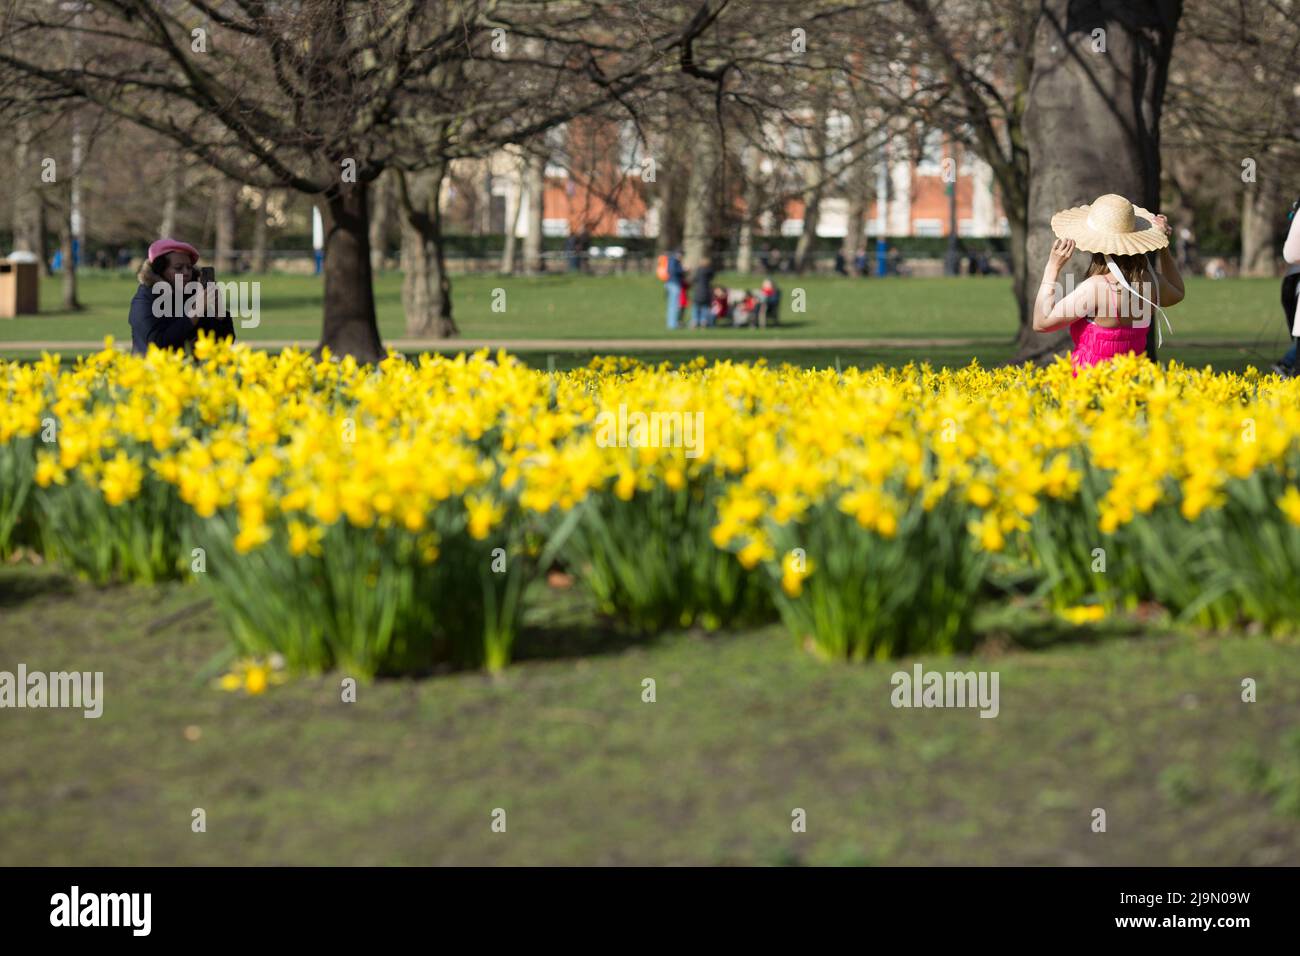 People take photographs as daffodils bloom in St. James’s Park, central London. Stock Photo